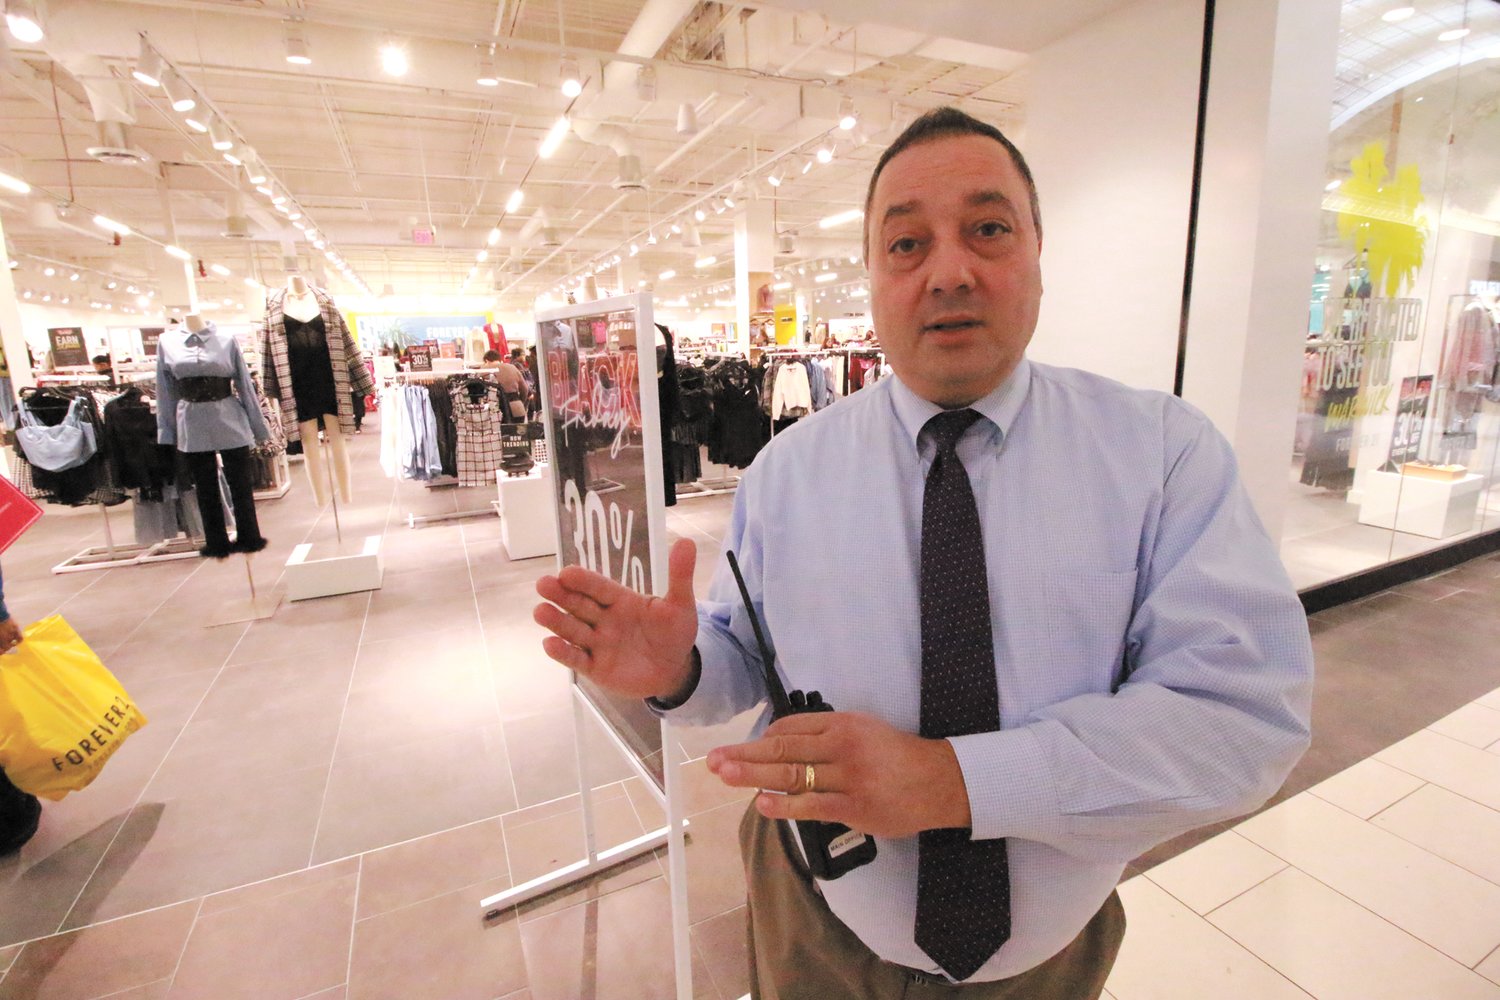 NEW TENANT…AND MORE TO COME: Domenic Schiavone outside the Forever 21 store that opened last spring at the Warwick Mall. The mall manager says a new to Rhode Island “theme based” outlet will be opening at the mall early next year.  (Warwick Beacon photos)